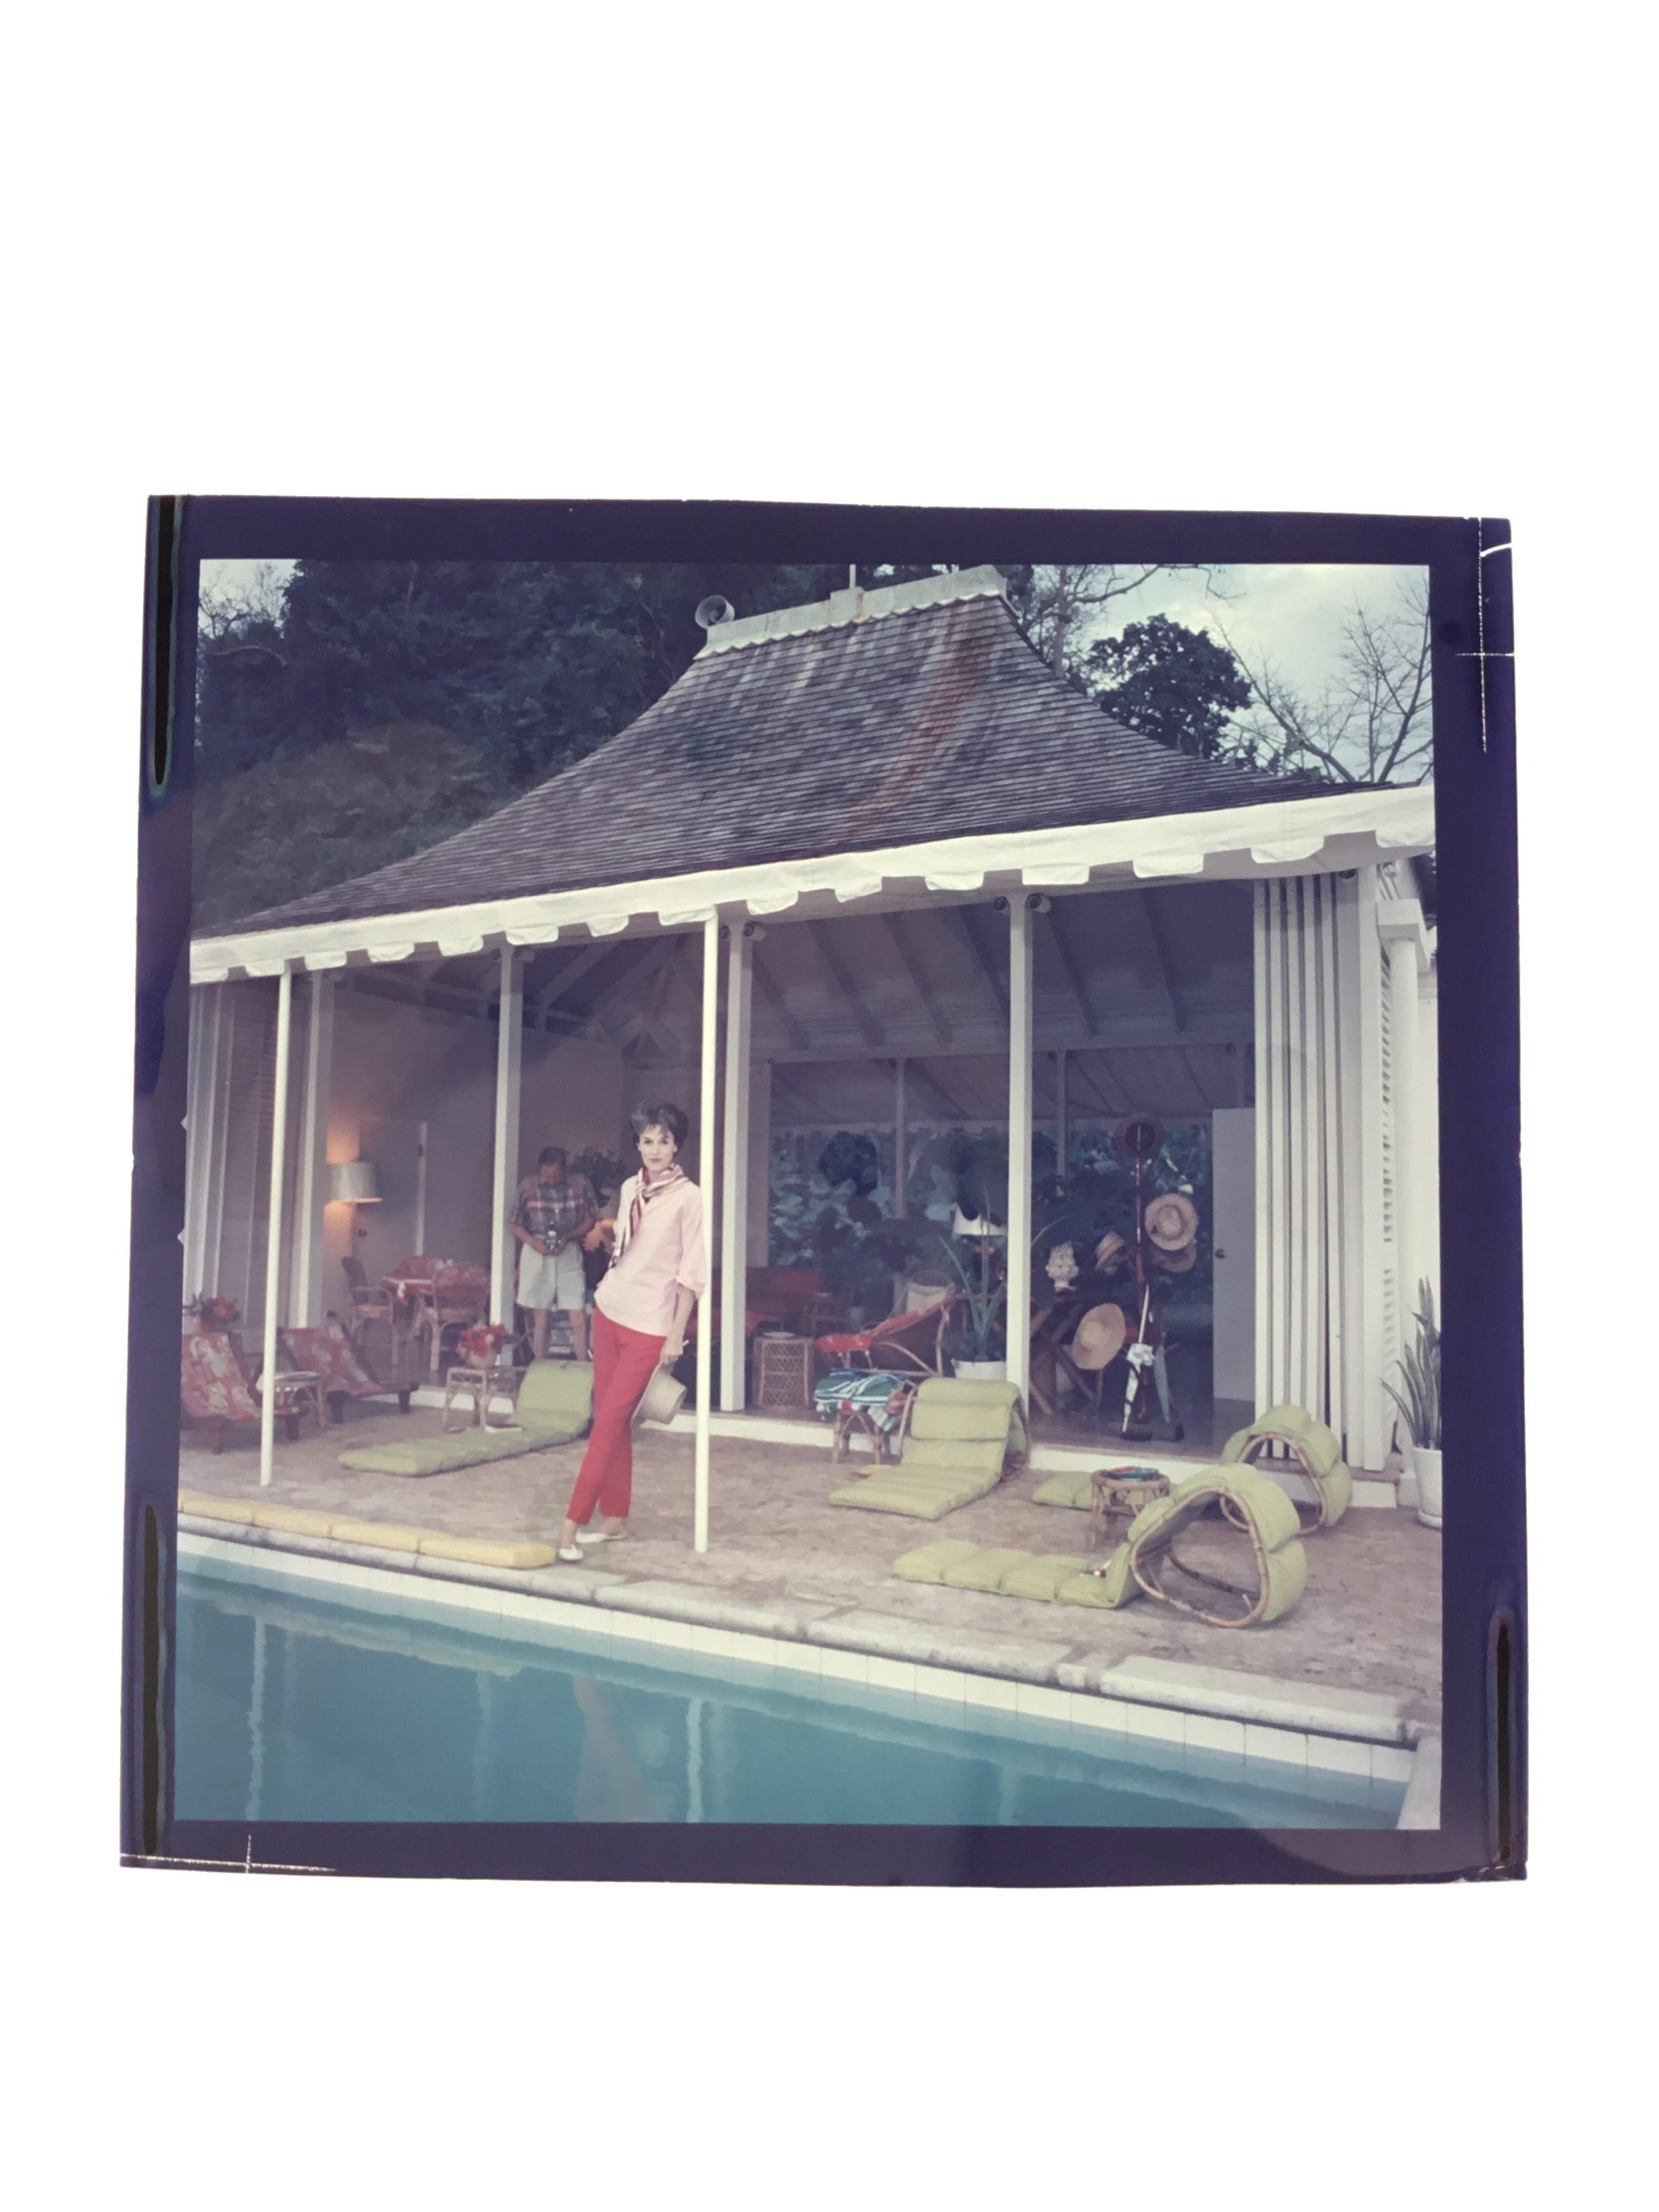 1959: Babe Paley (Mrs William Paley) by the pool. Her husband, William Paley is snapping the photographer at their cottage, Round Hill, Jamaica. A Wonderful Time - Slim Aarons (Photo by Slim Aarons/Getty Images)

C-type print from the original